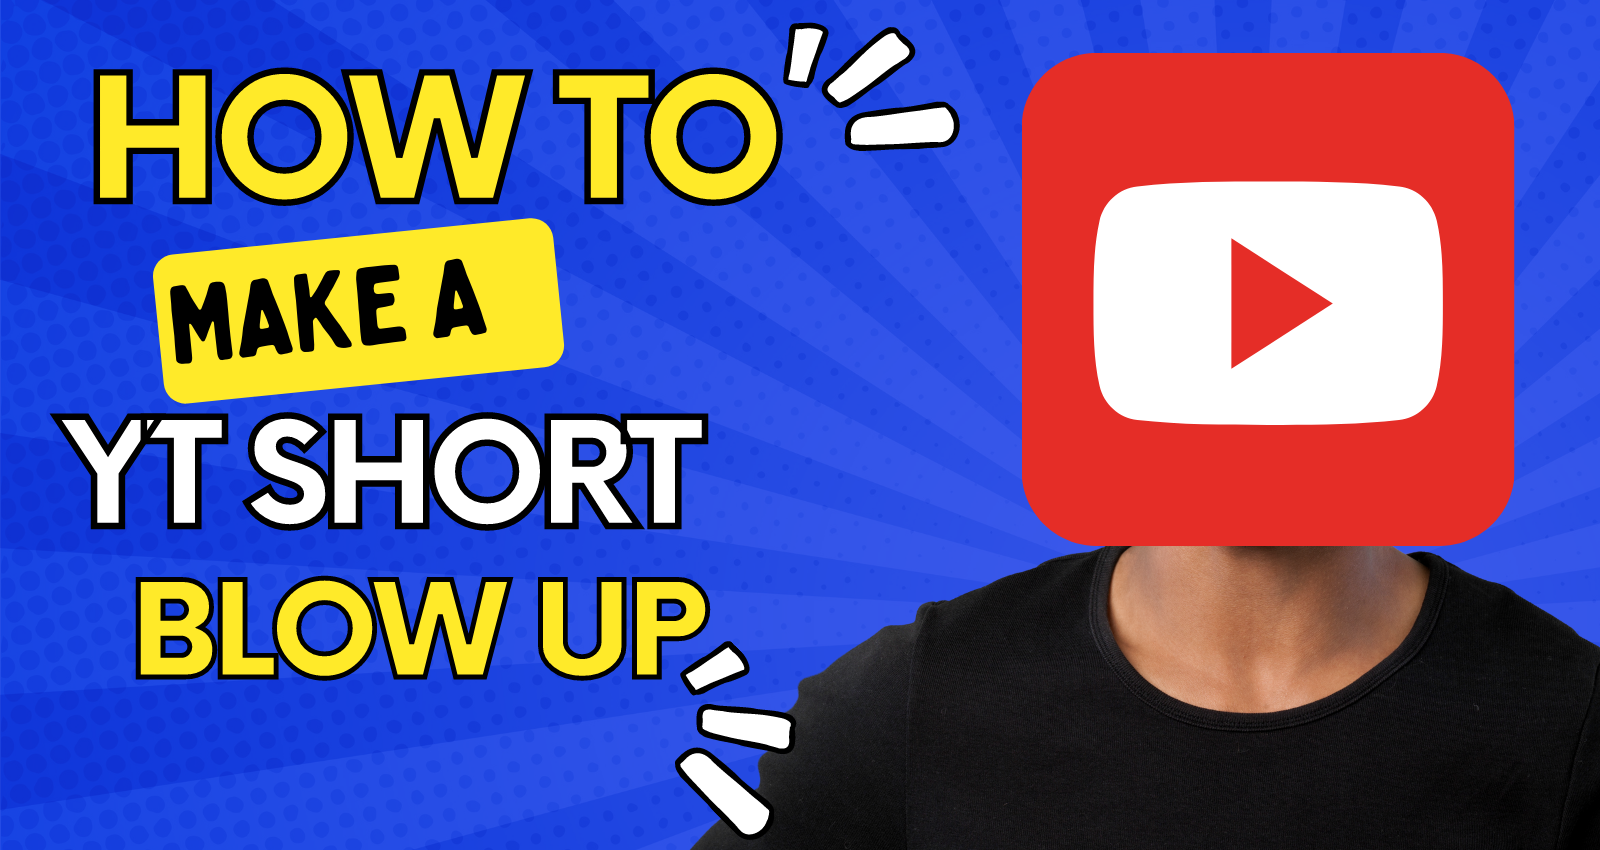 How to make a youtube short blow up